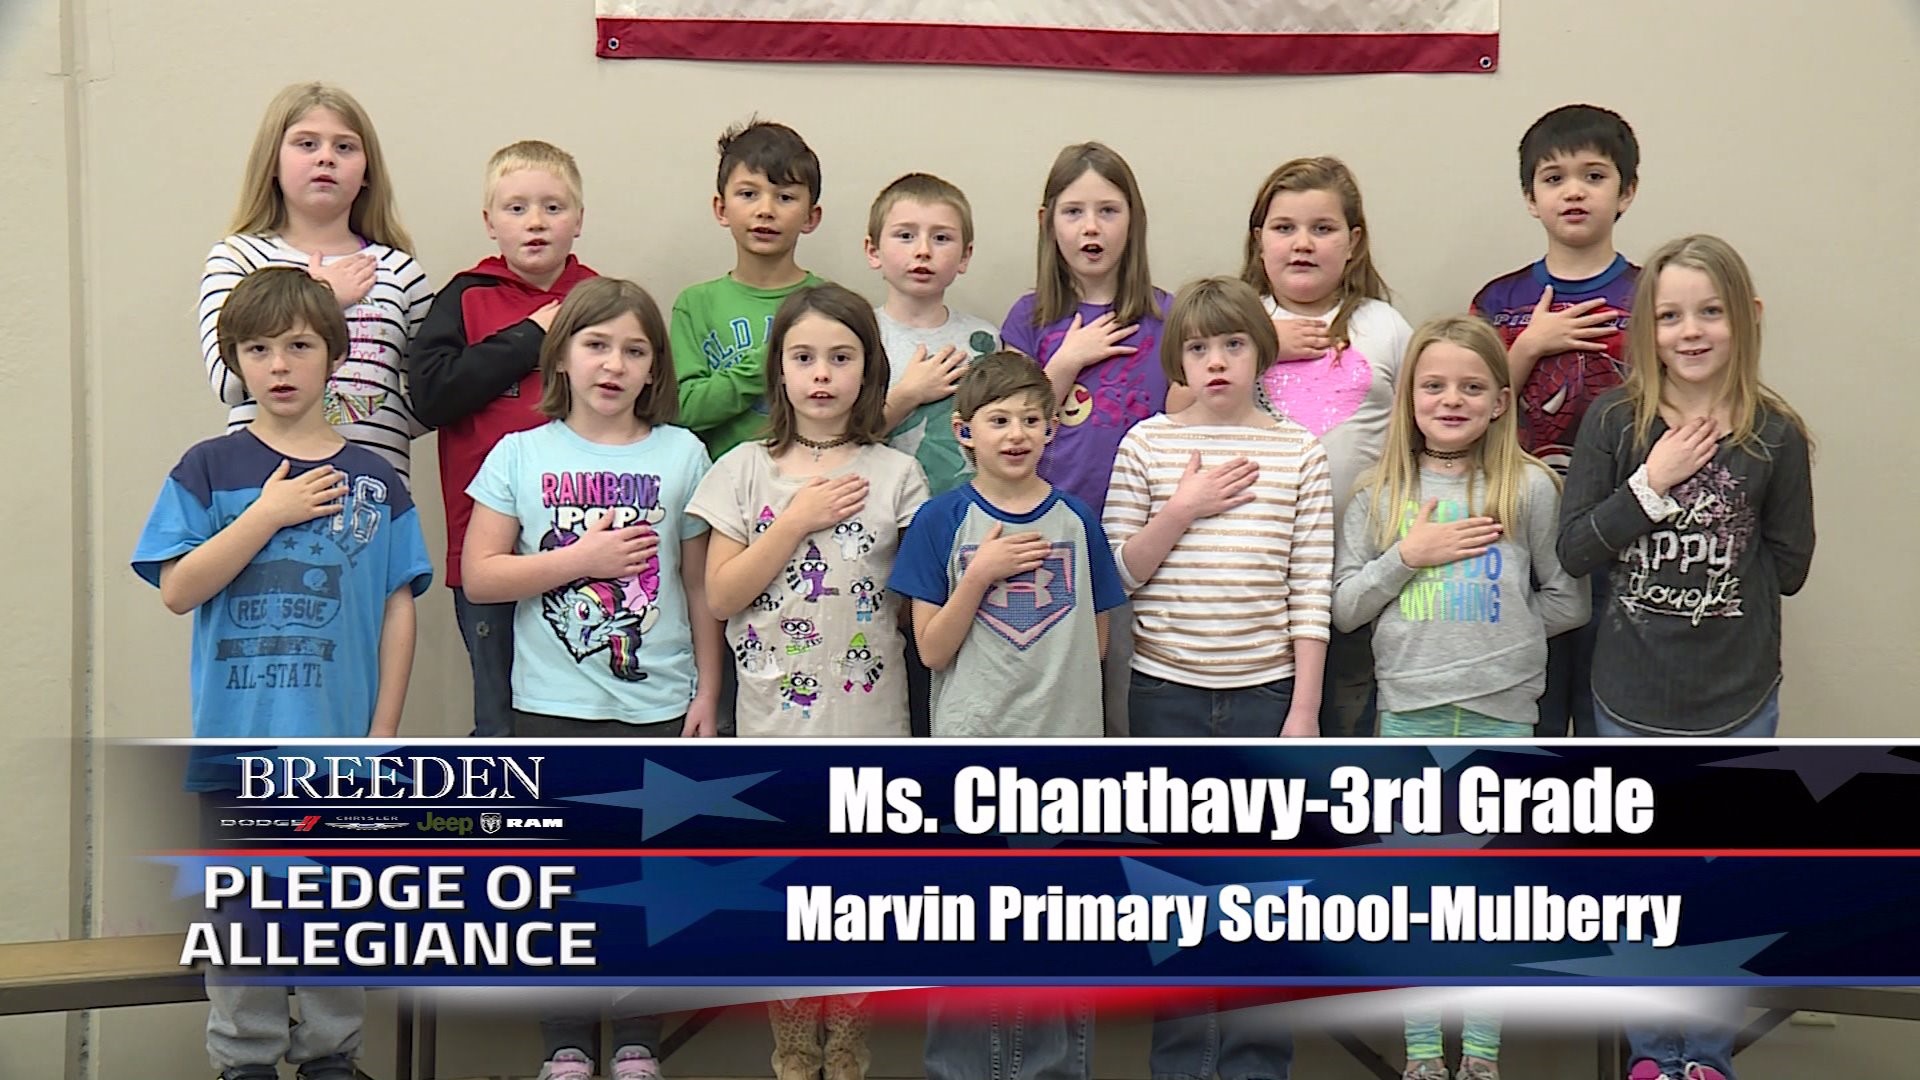 Ms. Chanthavy  3rd Grade Marvin Primary School, Mulberry